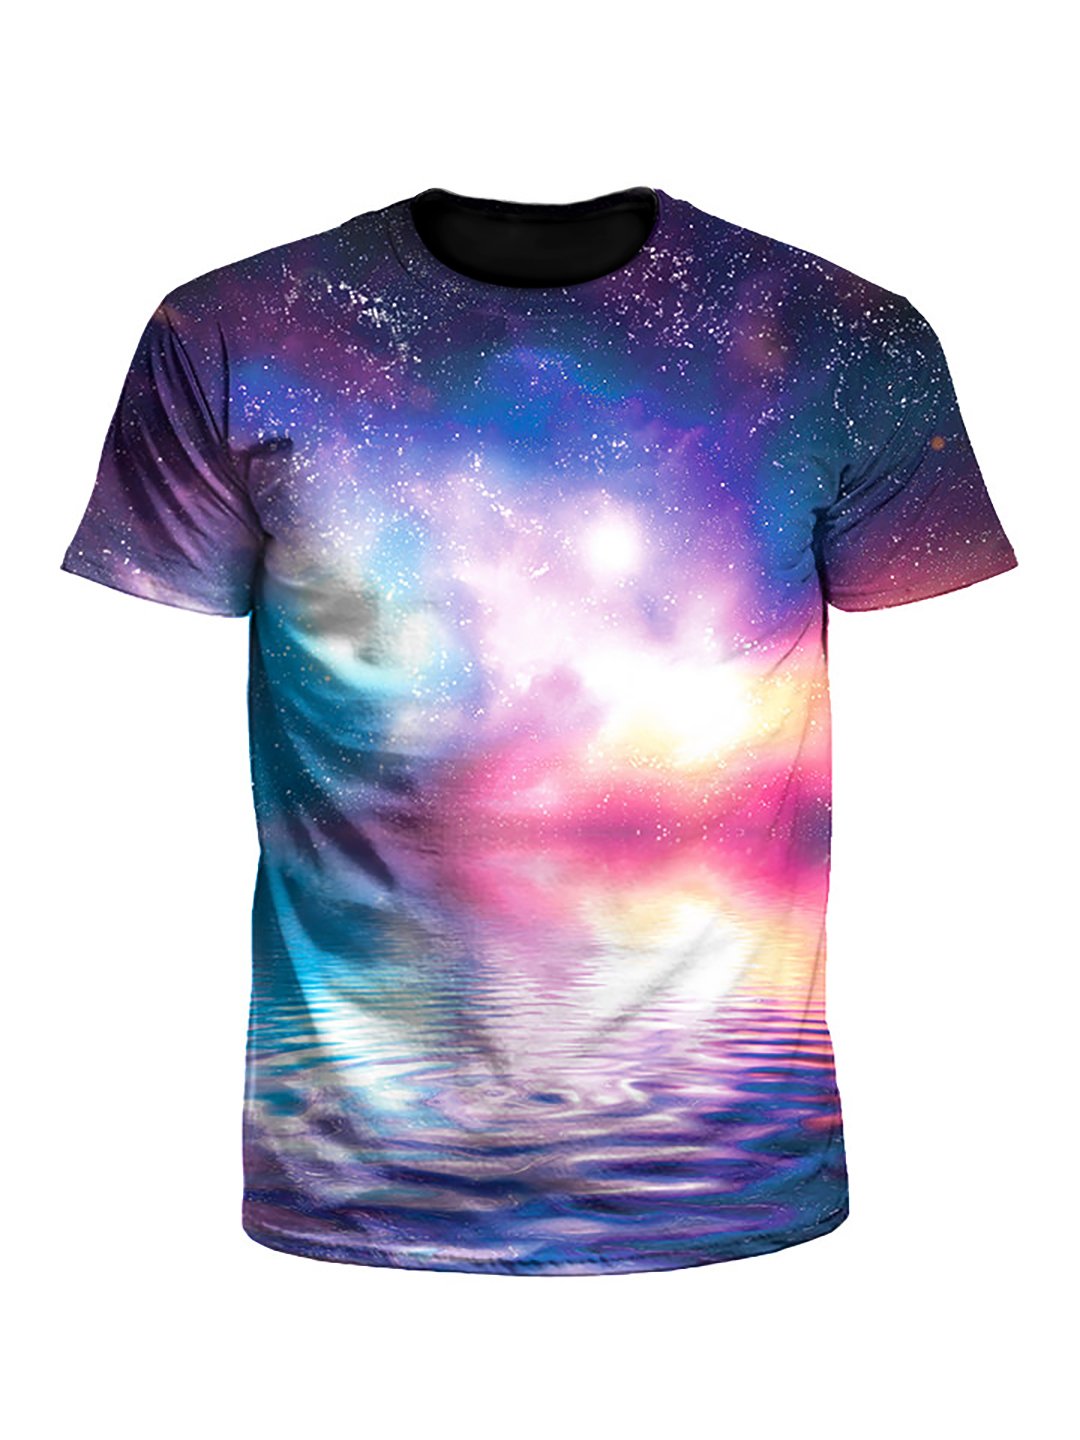 Ripple In Space Water Galaxy Unisex T-Shirt - Boogie Threads